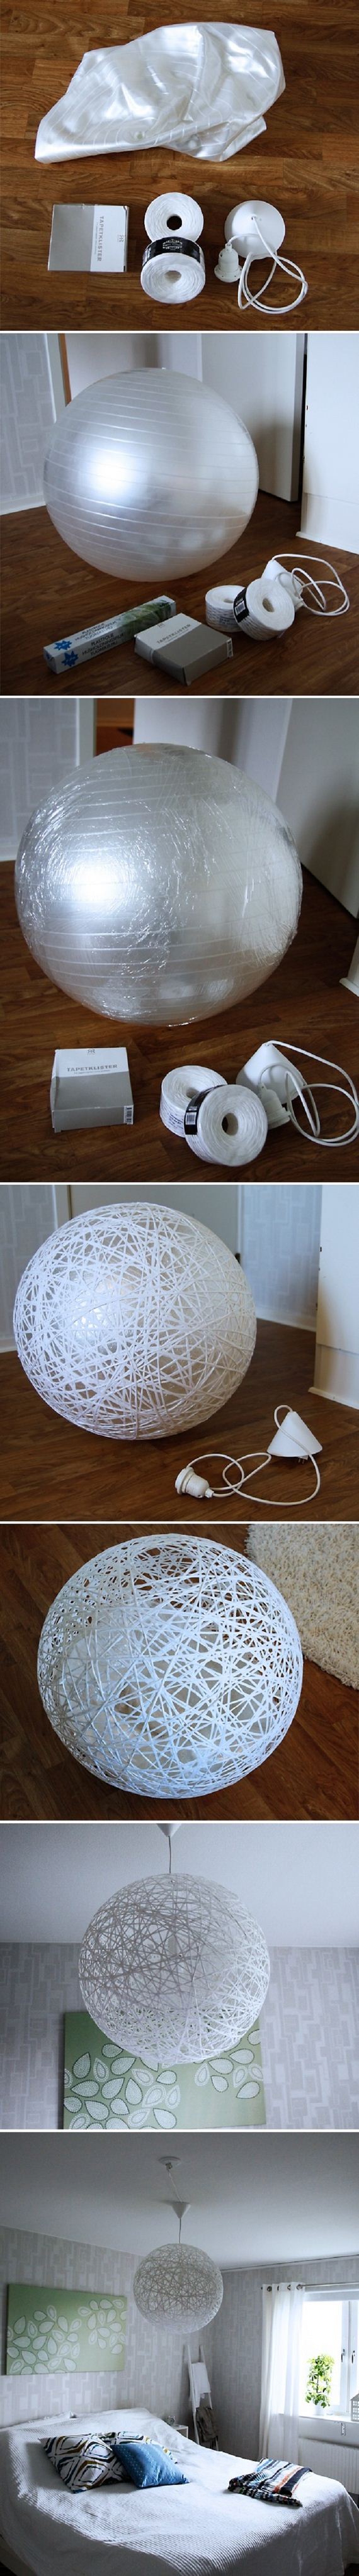 04-instant-and-fun-easy-diy-craft-projects-to-do-at-home